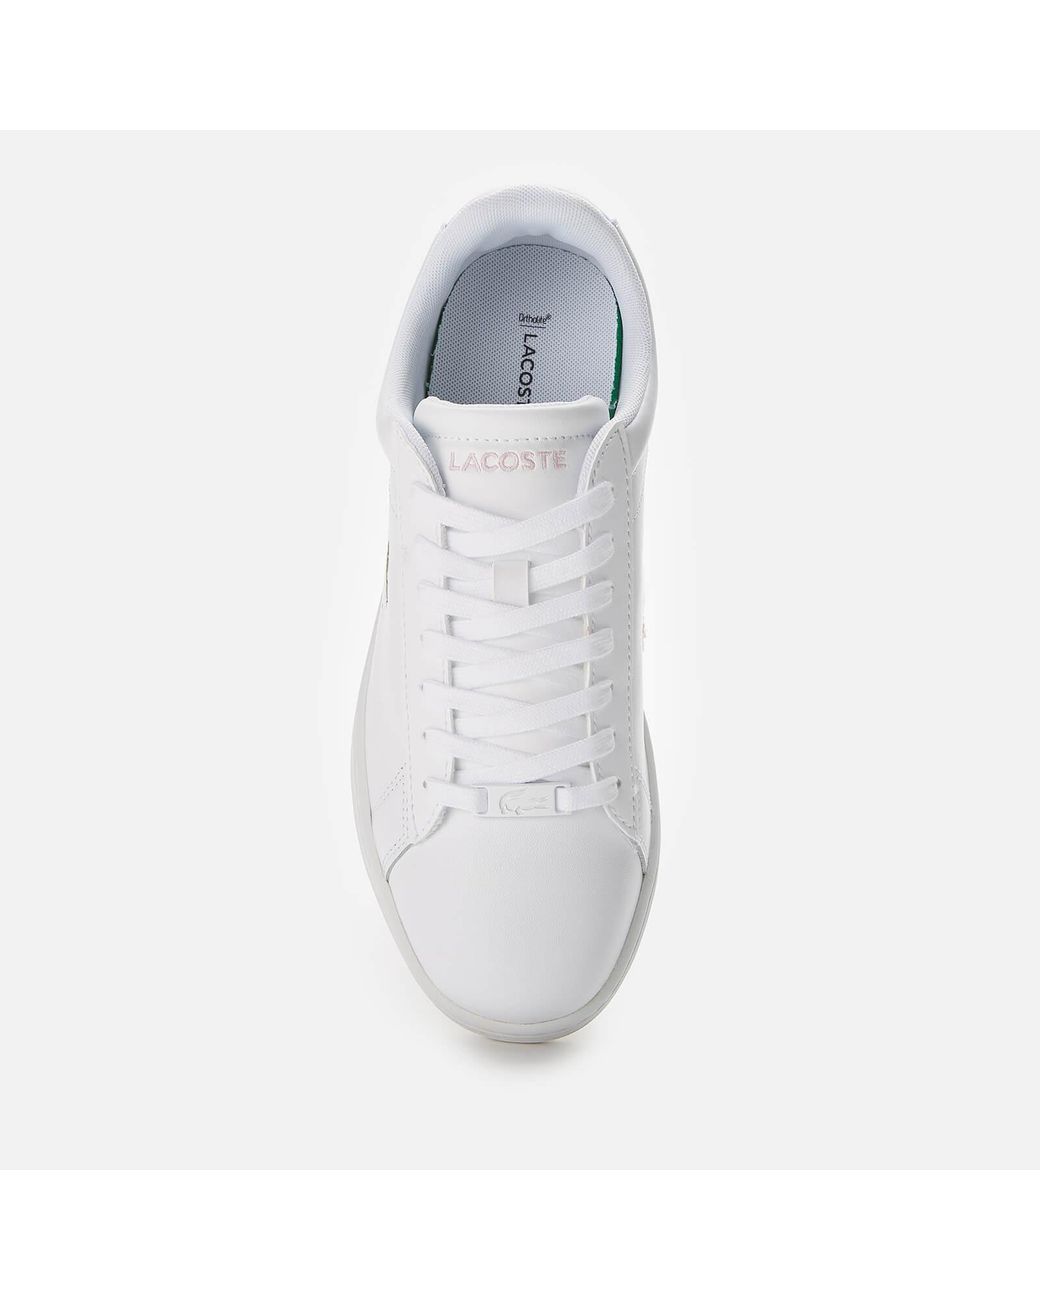 Lacoste Carnaby Evo 0722 1 Leather Cupsole Trainers in White | Lyst